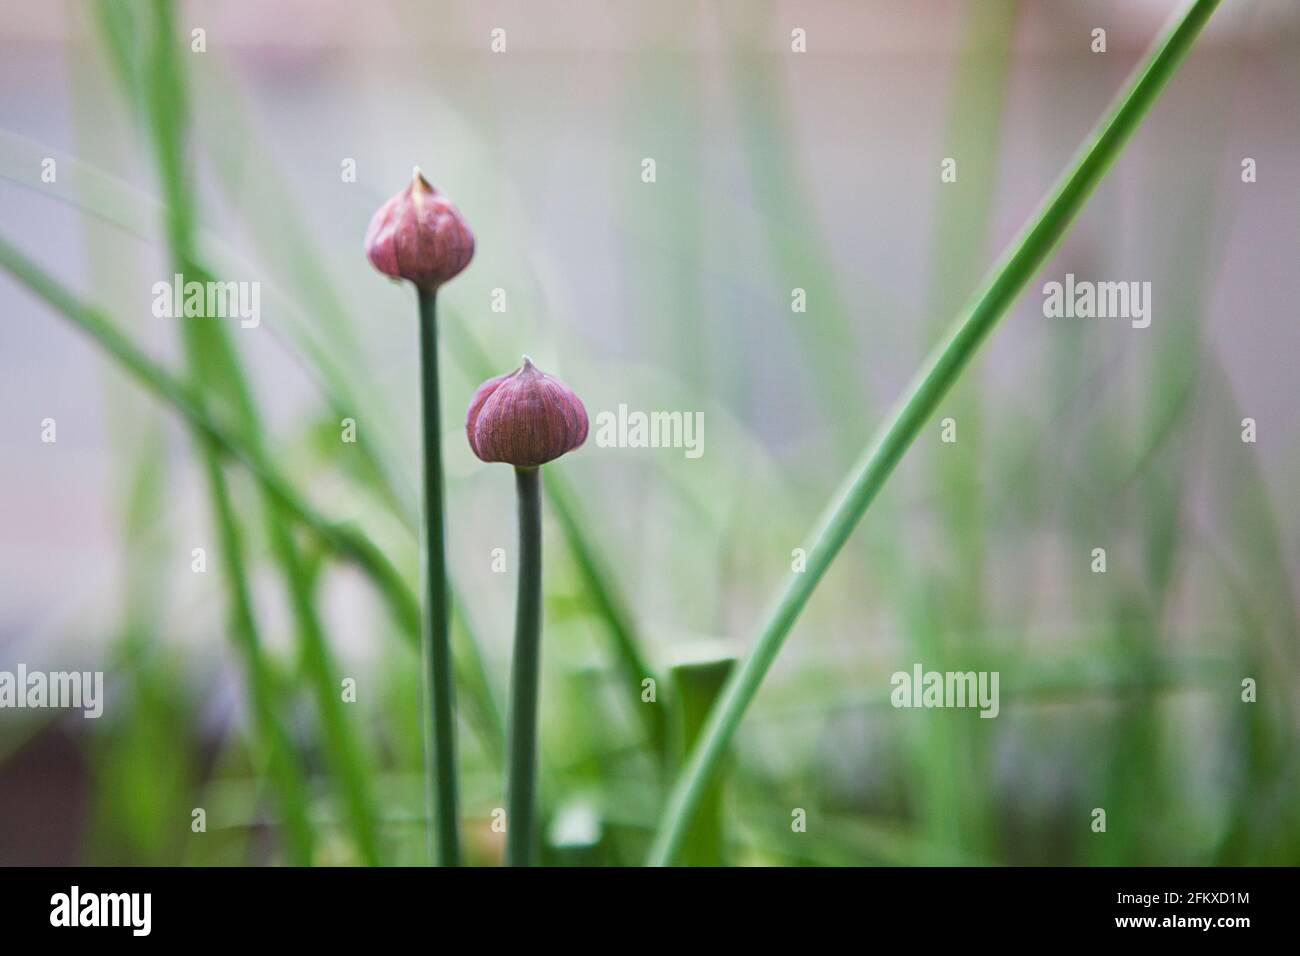 Chives (culinary herb Allium schoenoprasum) planted out in the garden with two purple flower buds. May, springtime, UK Stock Photo